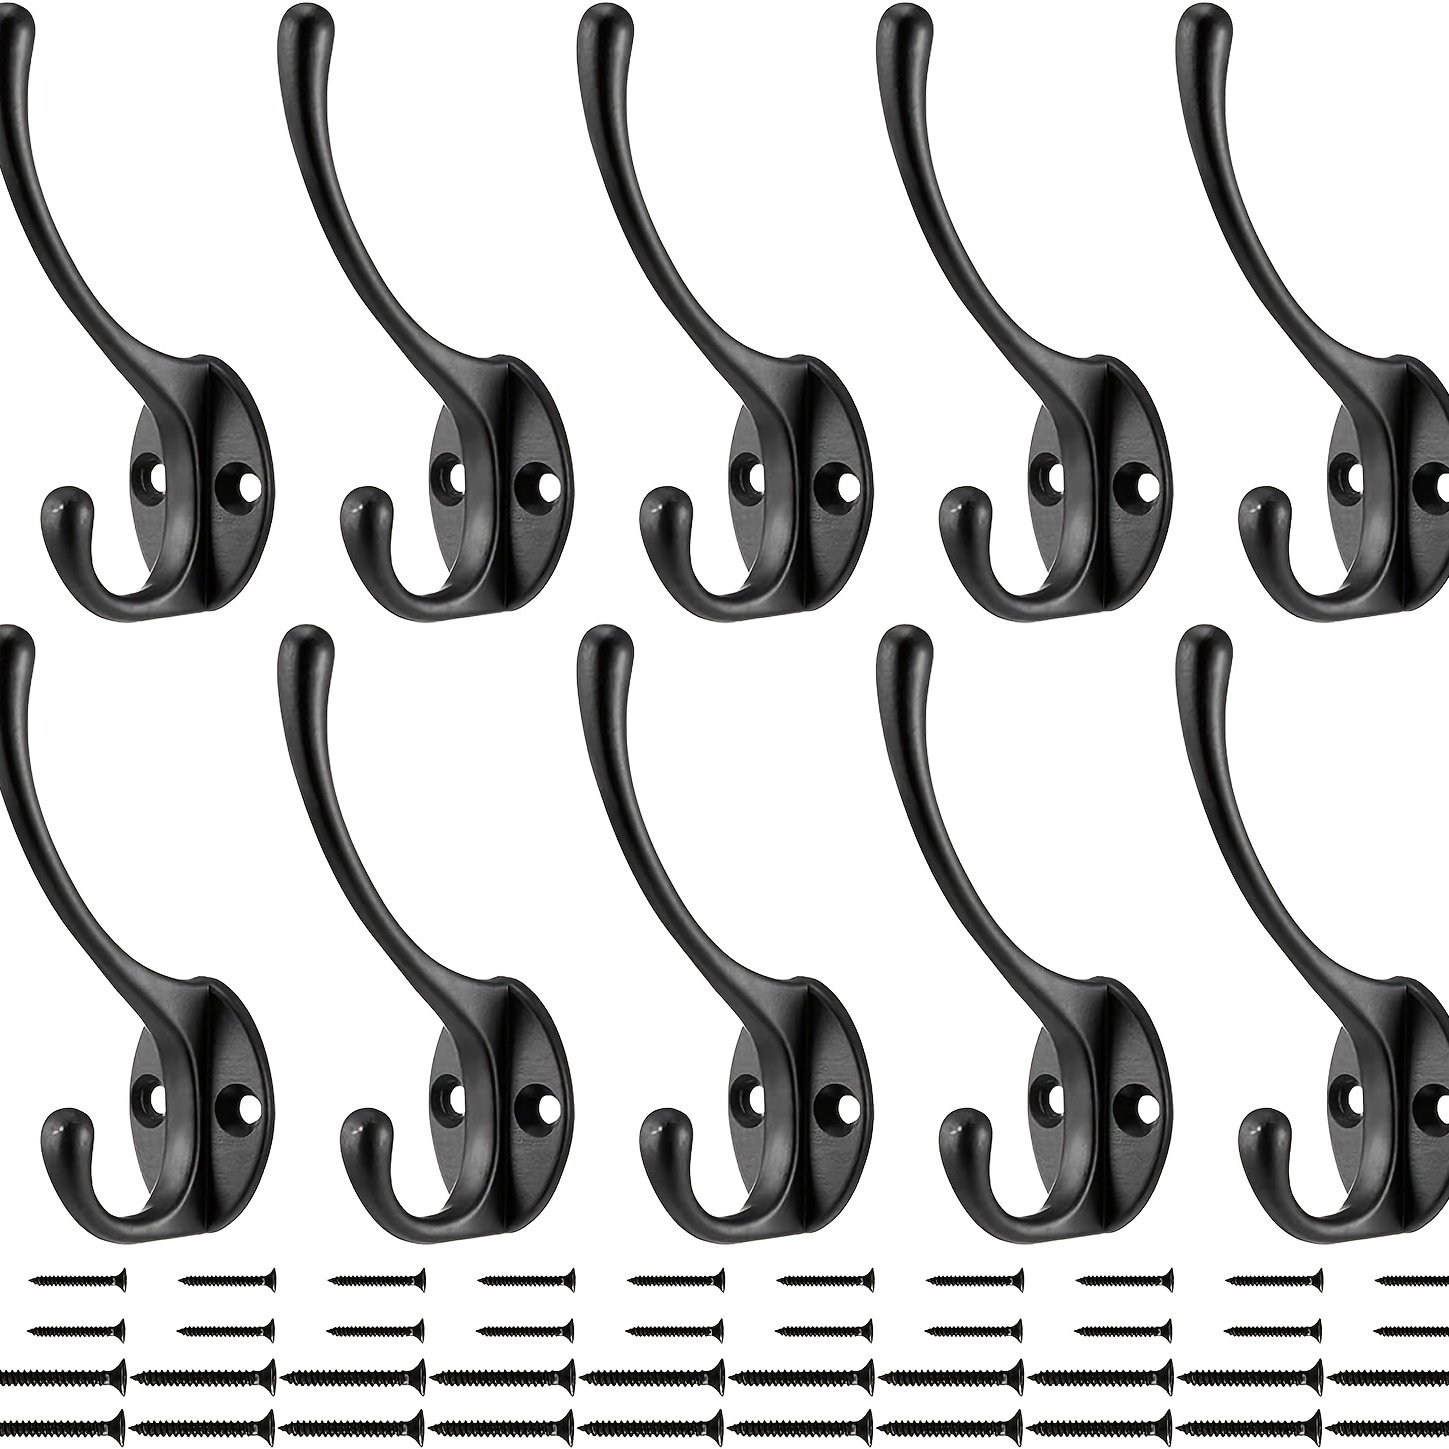 5pcs Decorative Coat Hooks For Wall Mount, Stylish And Sturdy Metal Double  Hooks, Perfect To Hang Your Jackets, Towels Or Hats